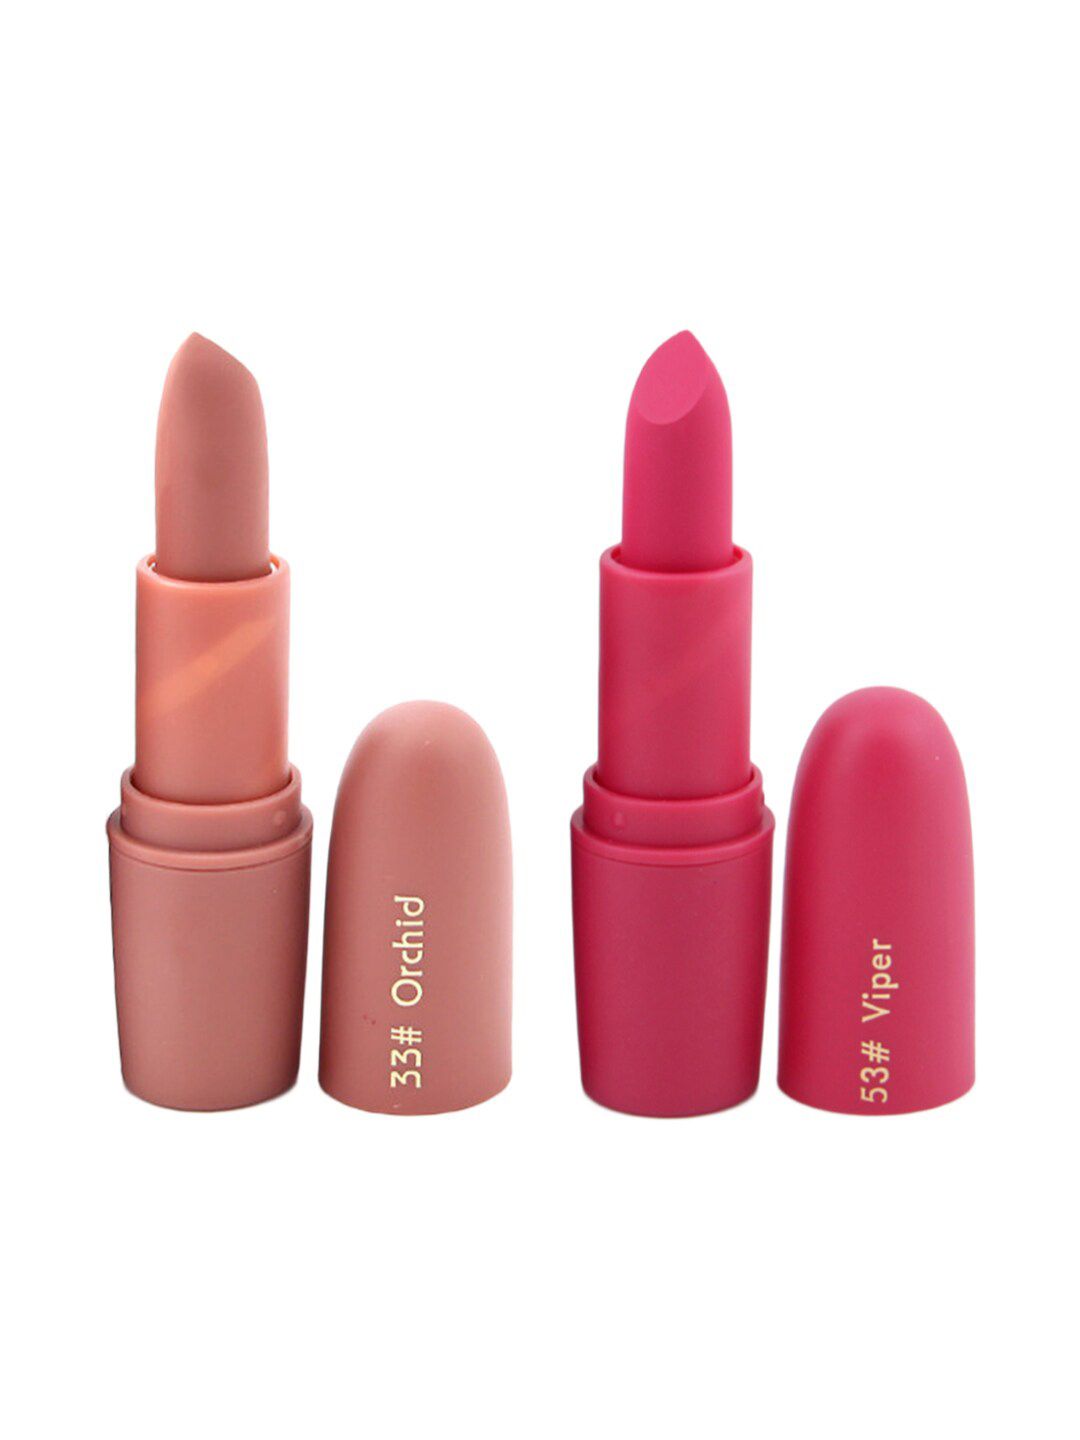 MISS ROSE Professional Make-Up Set of 2 Matte Creamy Lipsticks - Orchid 33 & Viper 53 Price in India